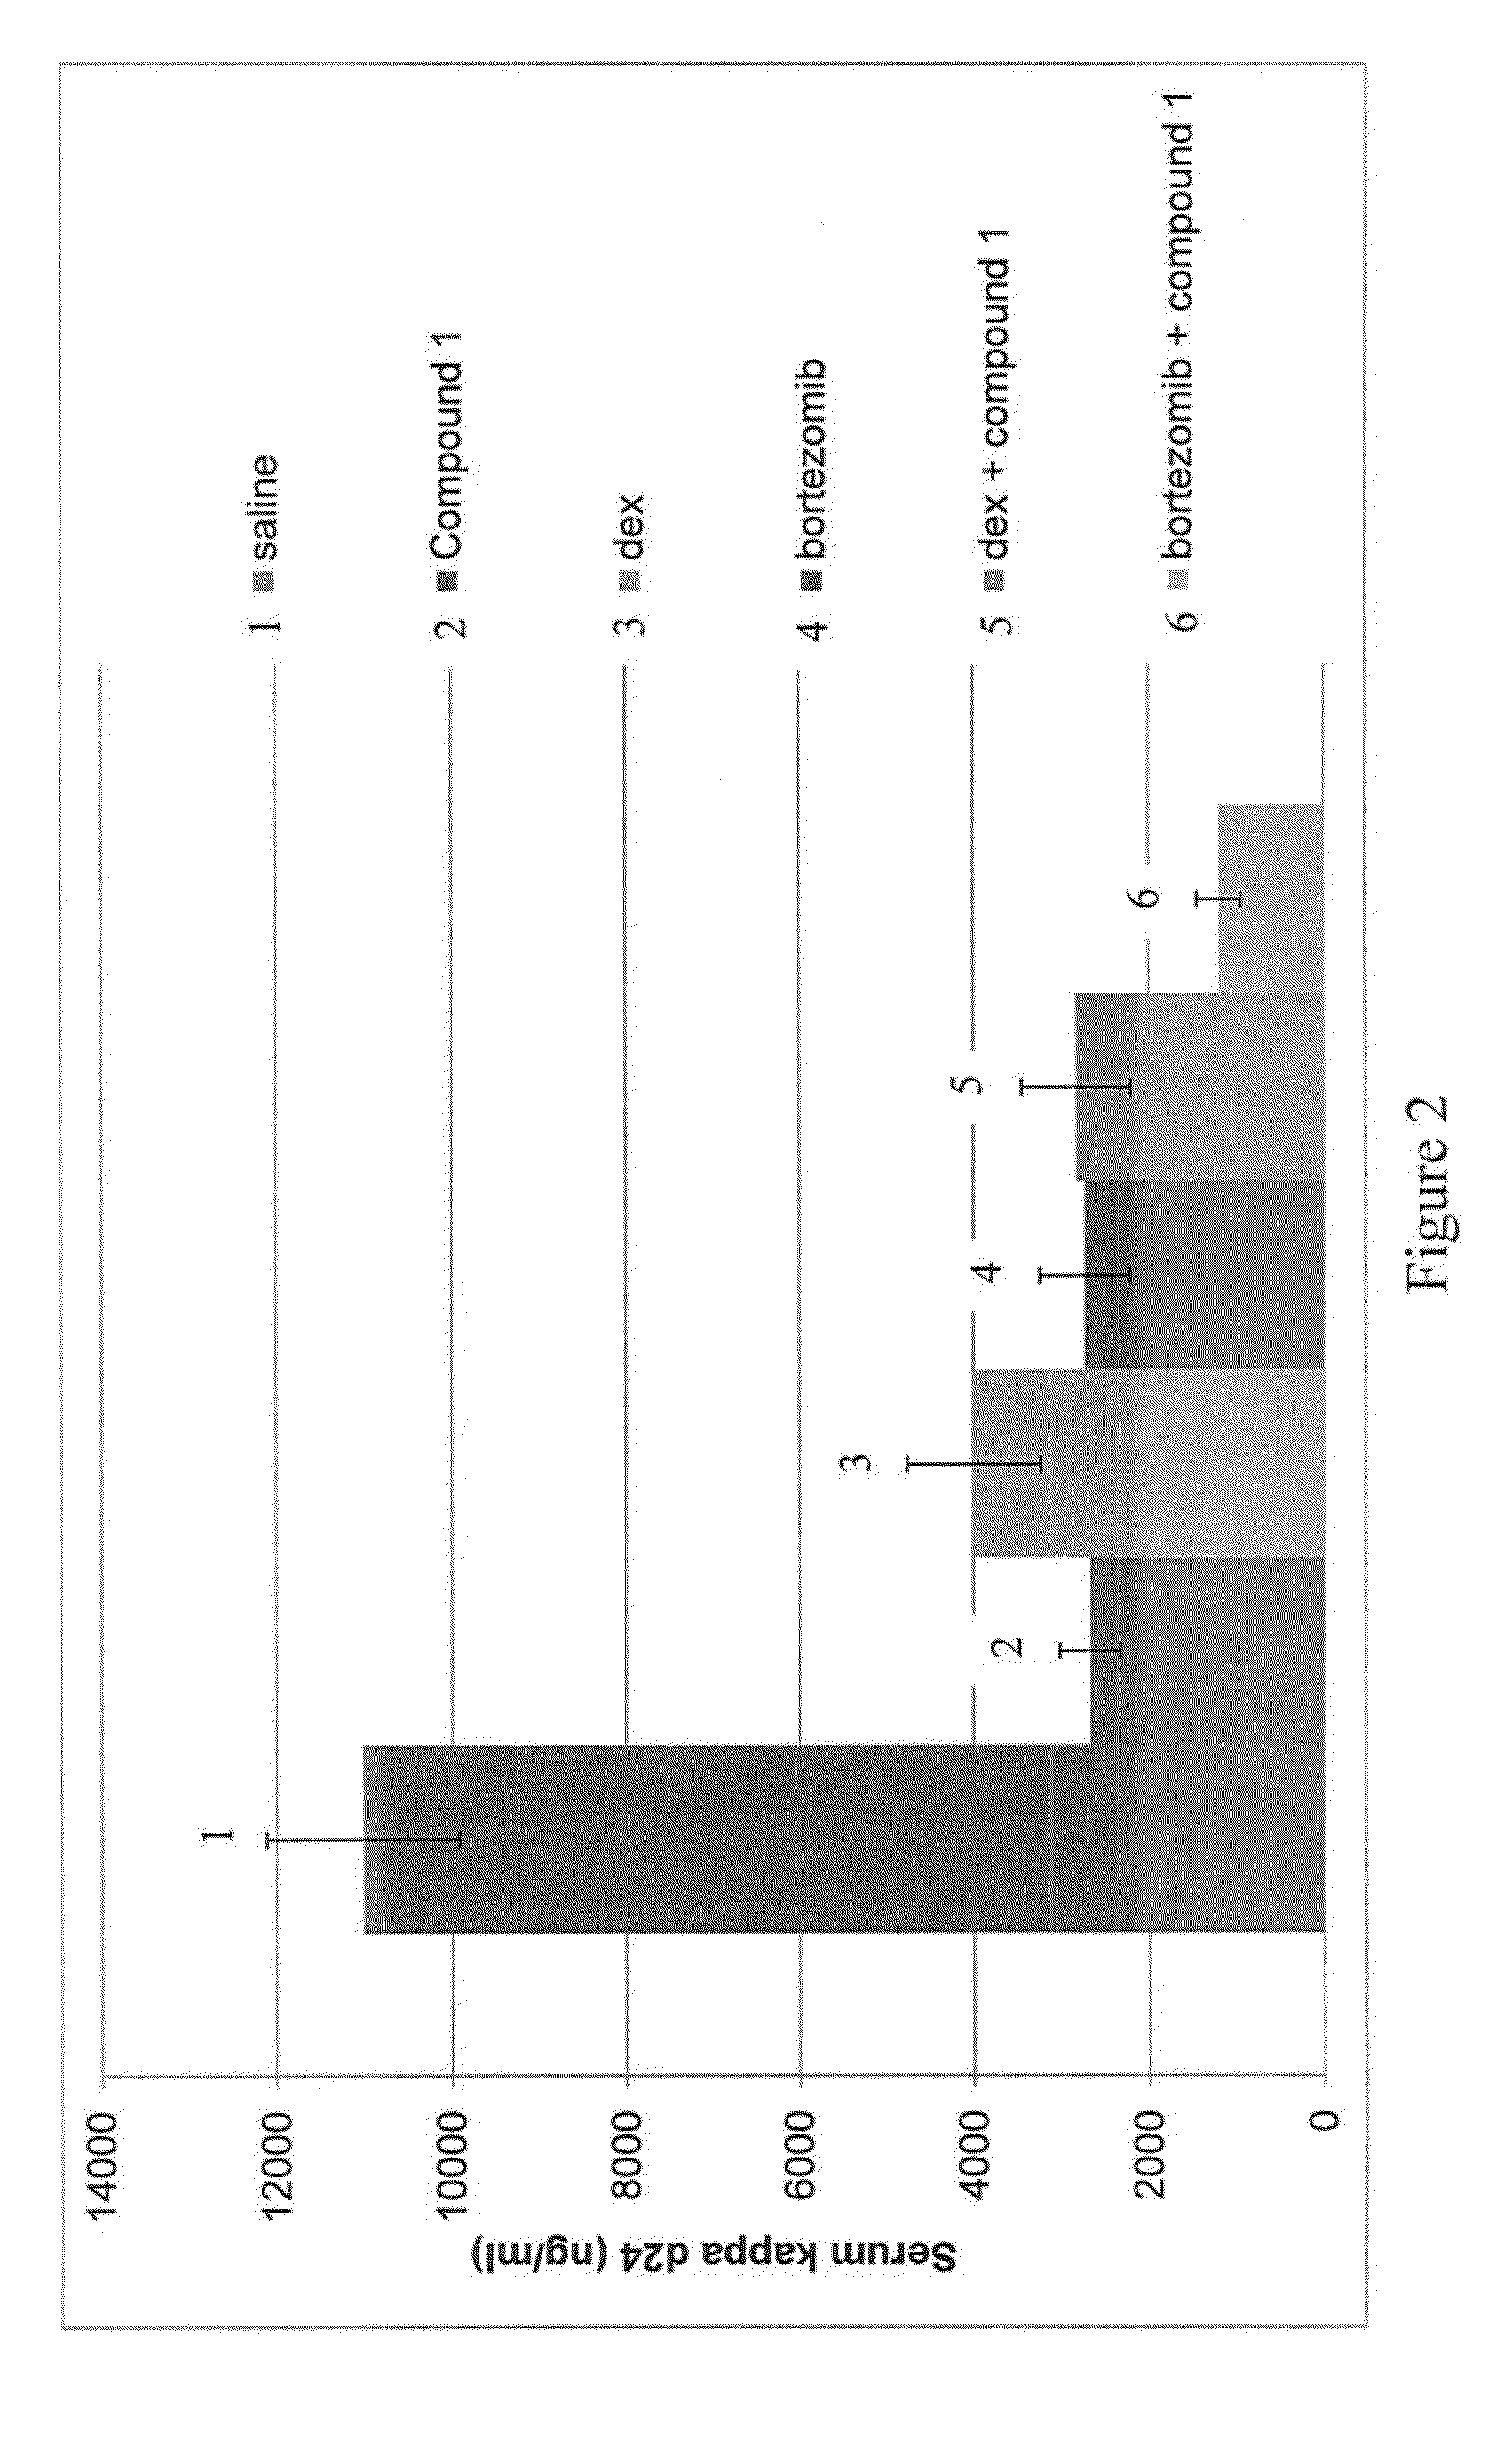 Compounds, Compositions and Methods for the Treatment of Diseases Through Inhibiting TGF- Activity